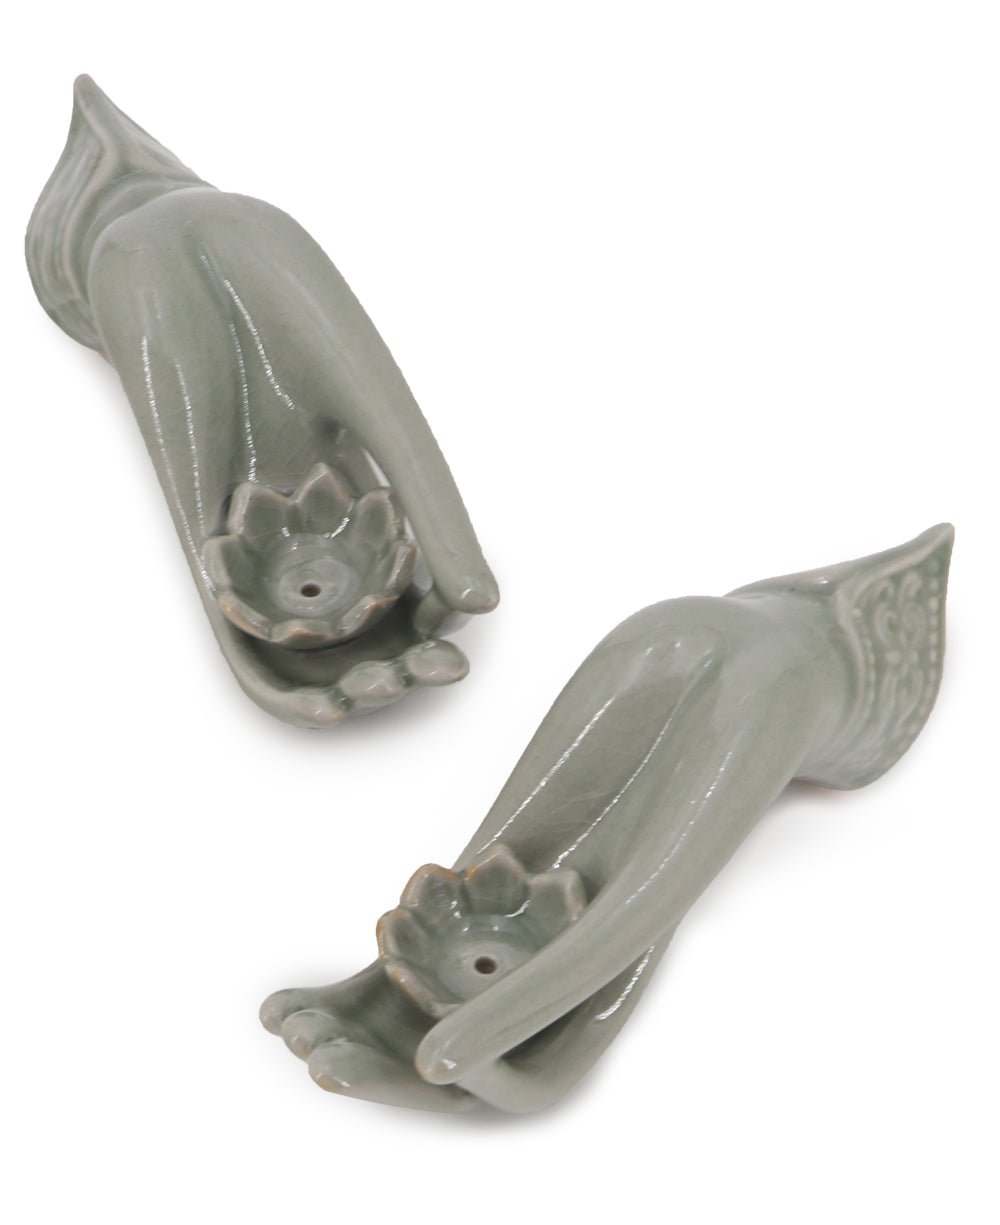 Set of Two Small Celadon Ceramic Mudra Hand Incense Holders - Incense Holders